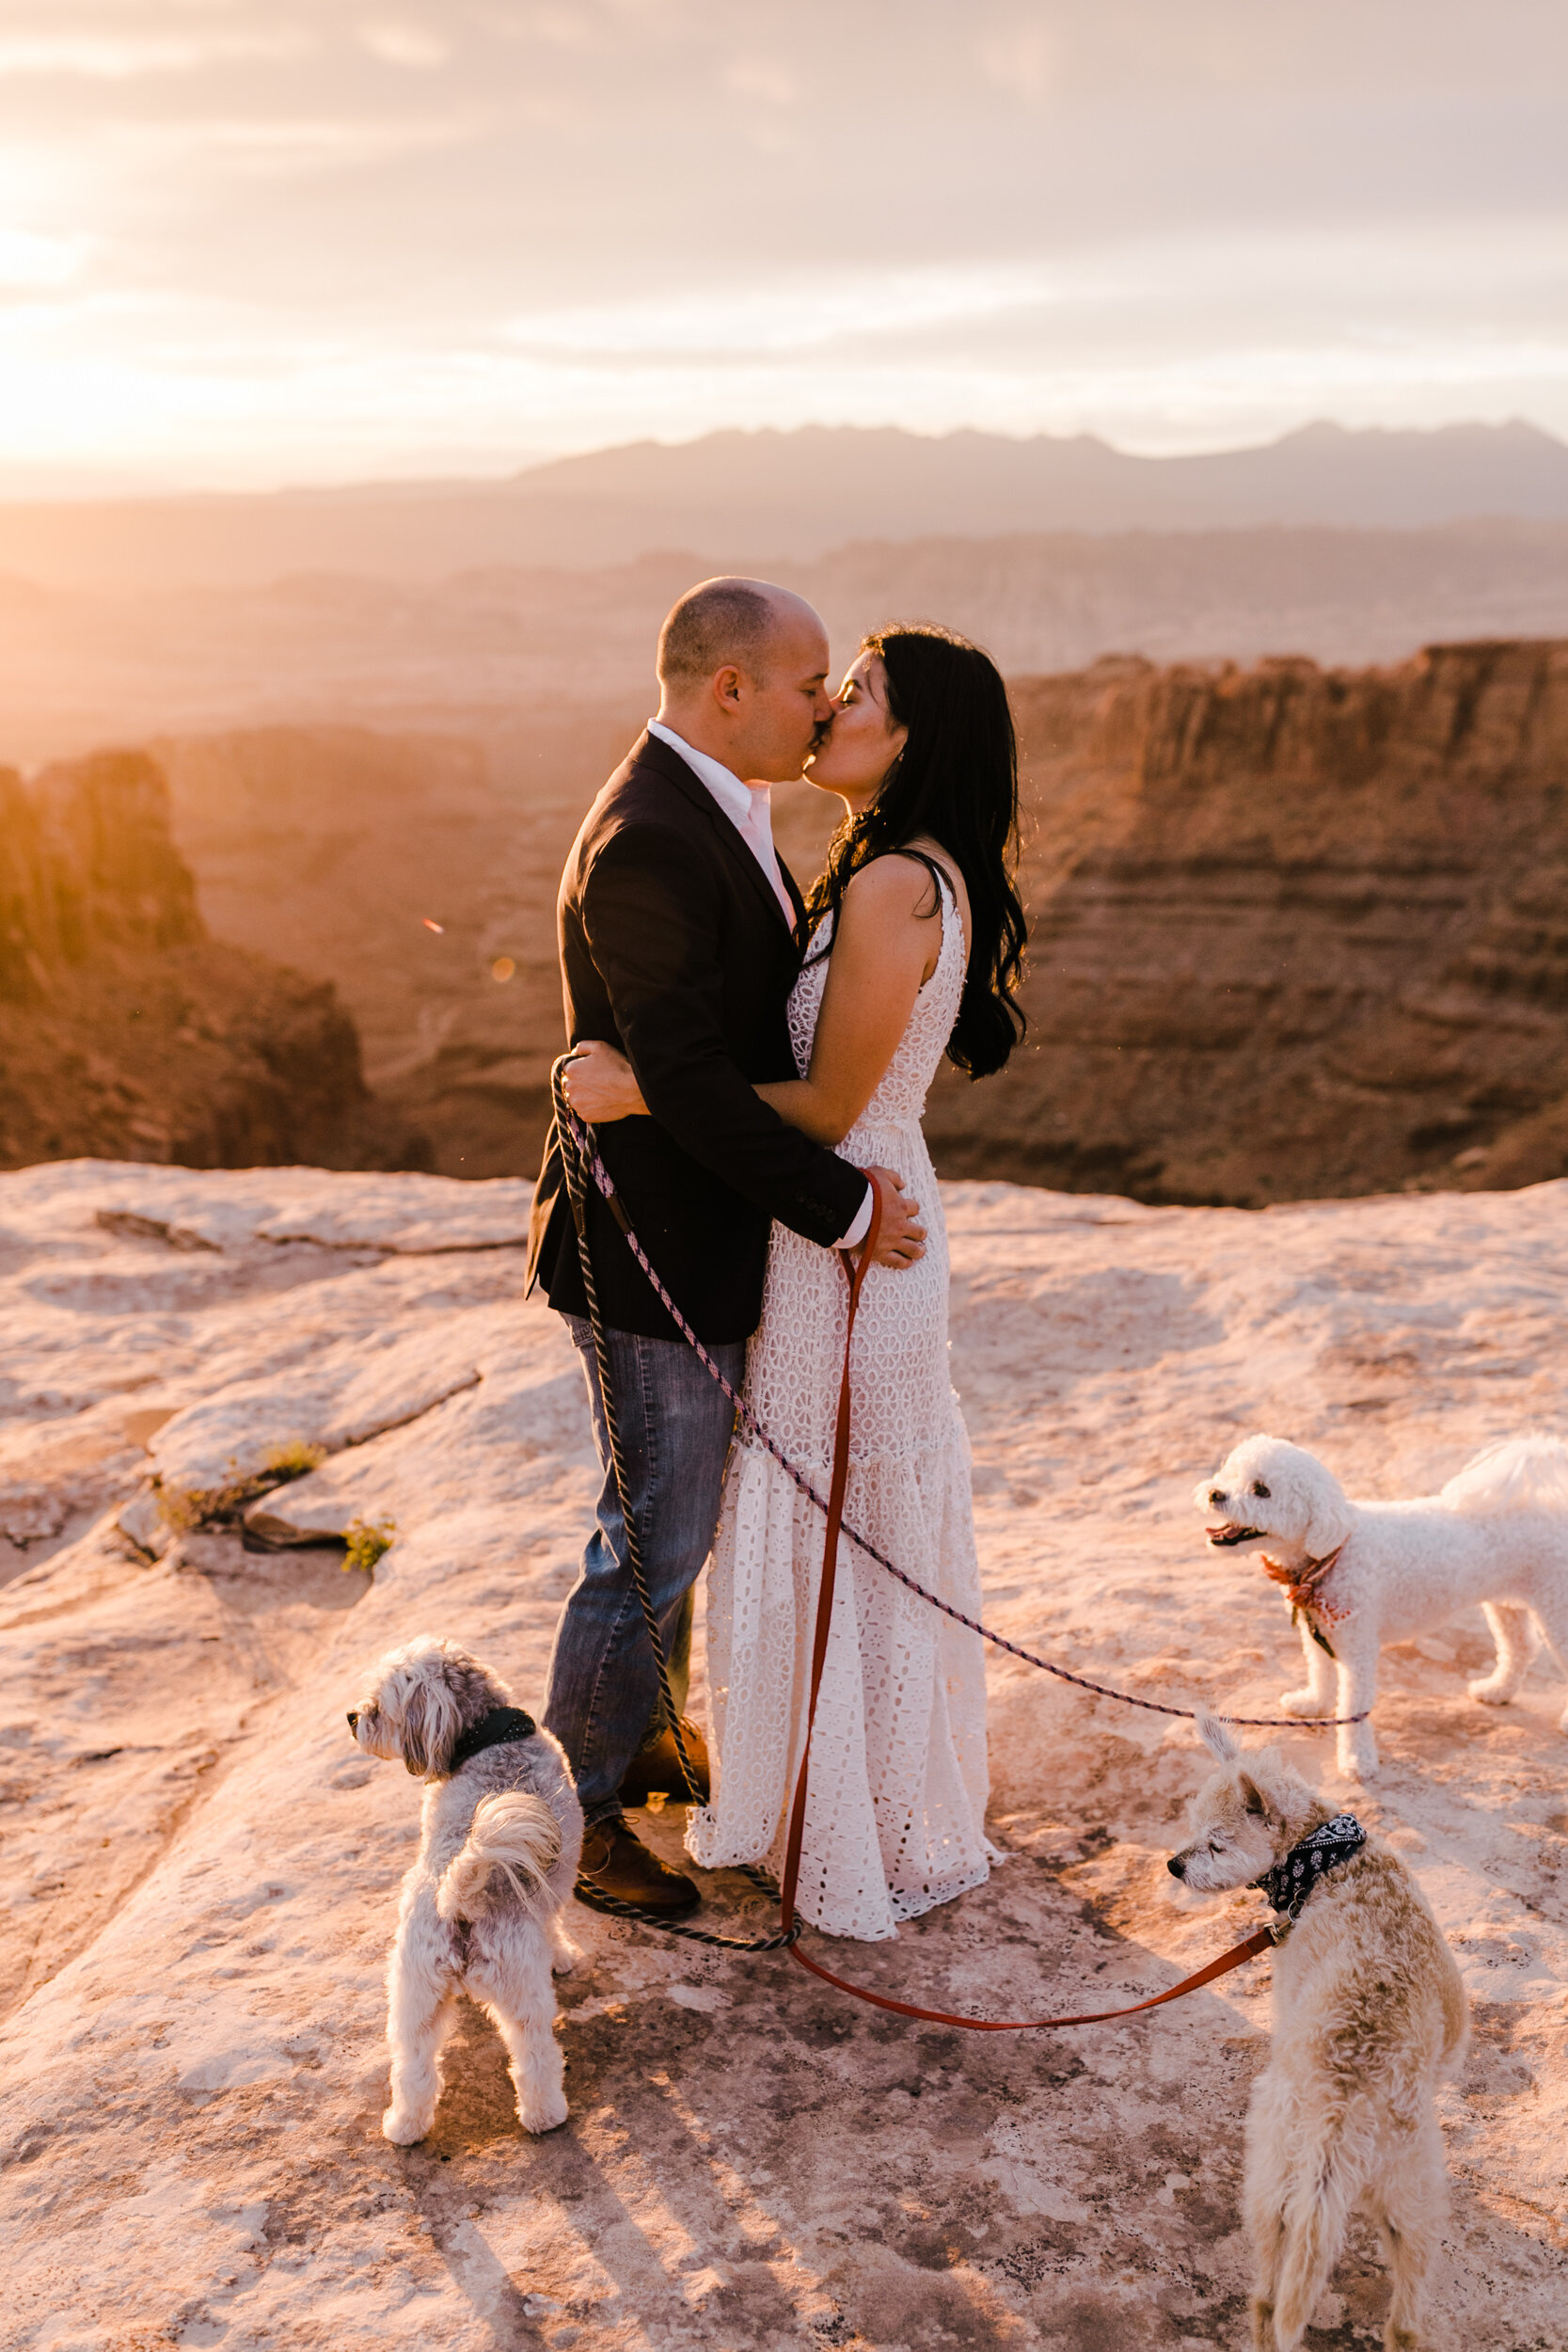 kimi + brett’s sunrise engagement photos in Moab, Utah with their dogs | utah elopement photographers | the hearnes adventure photography